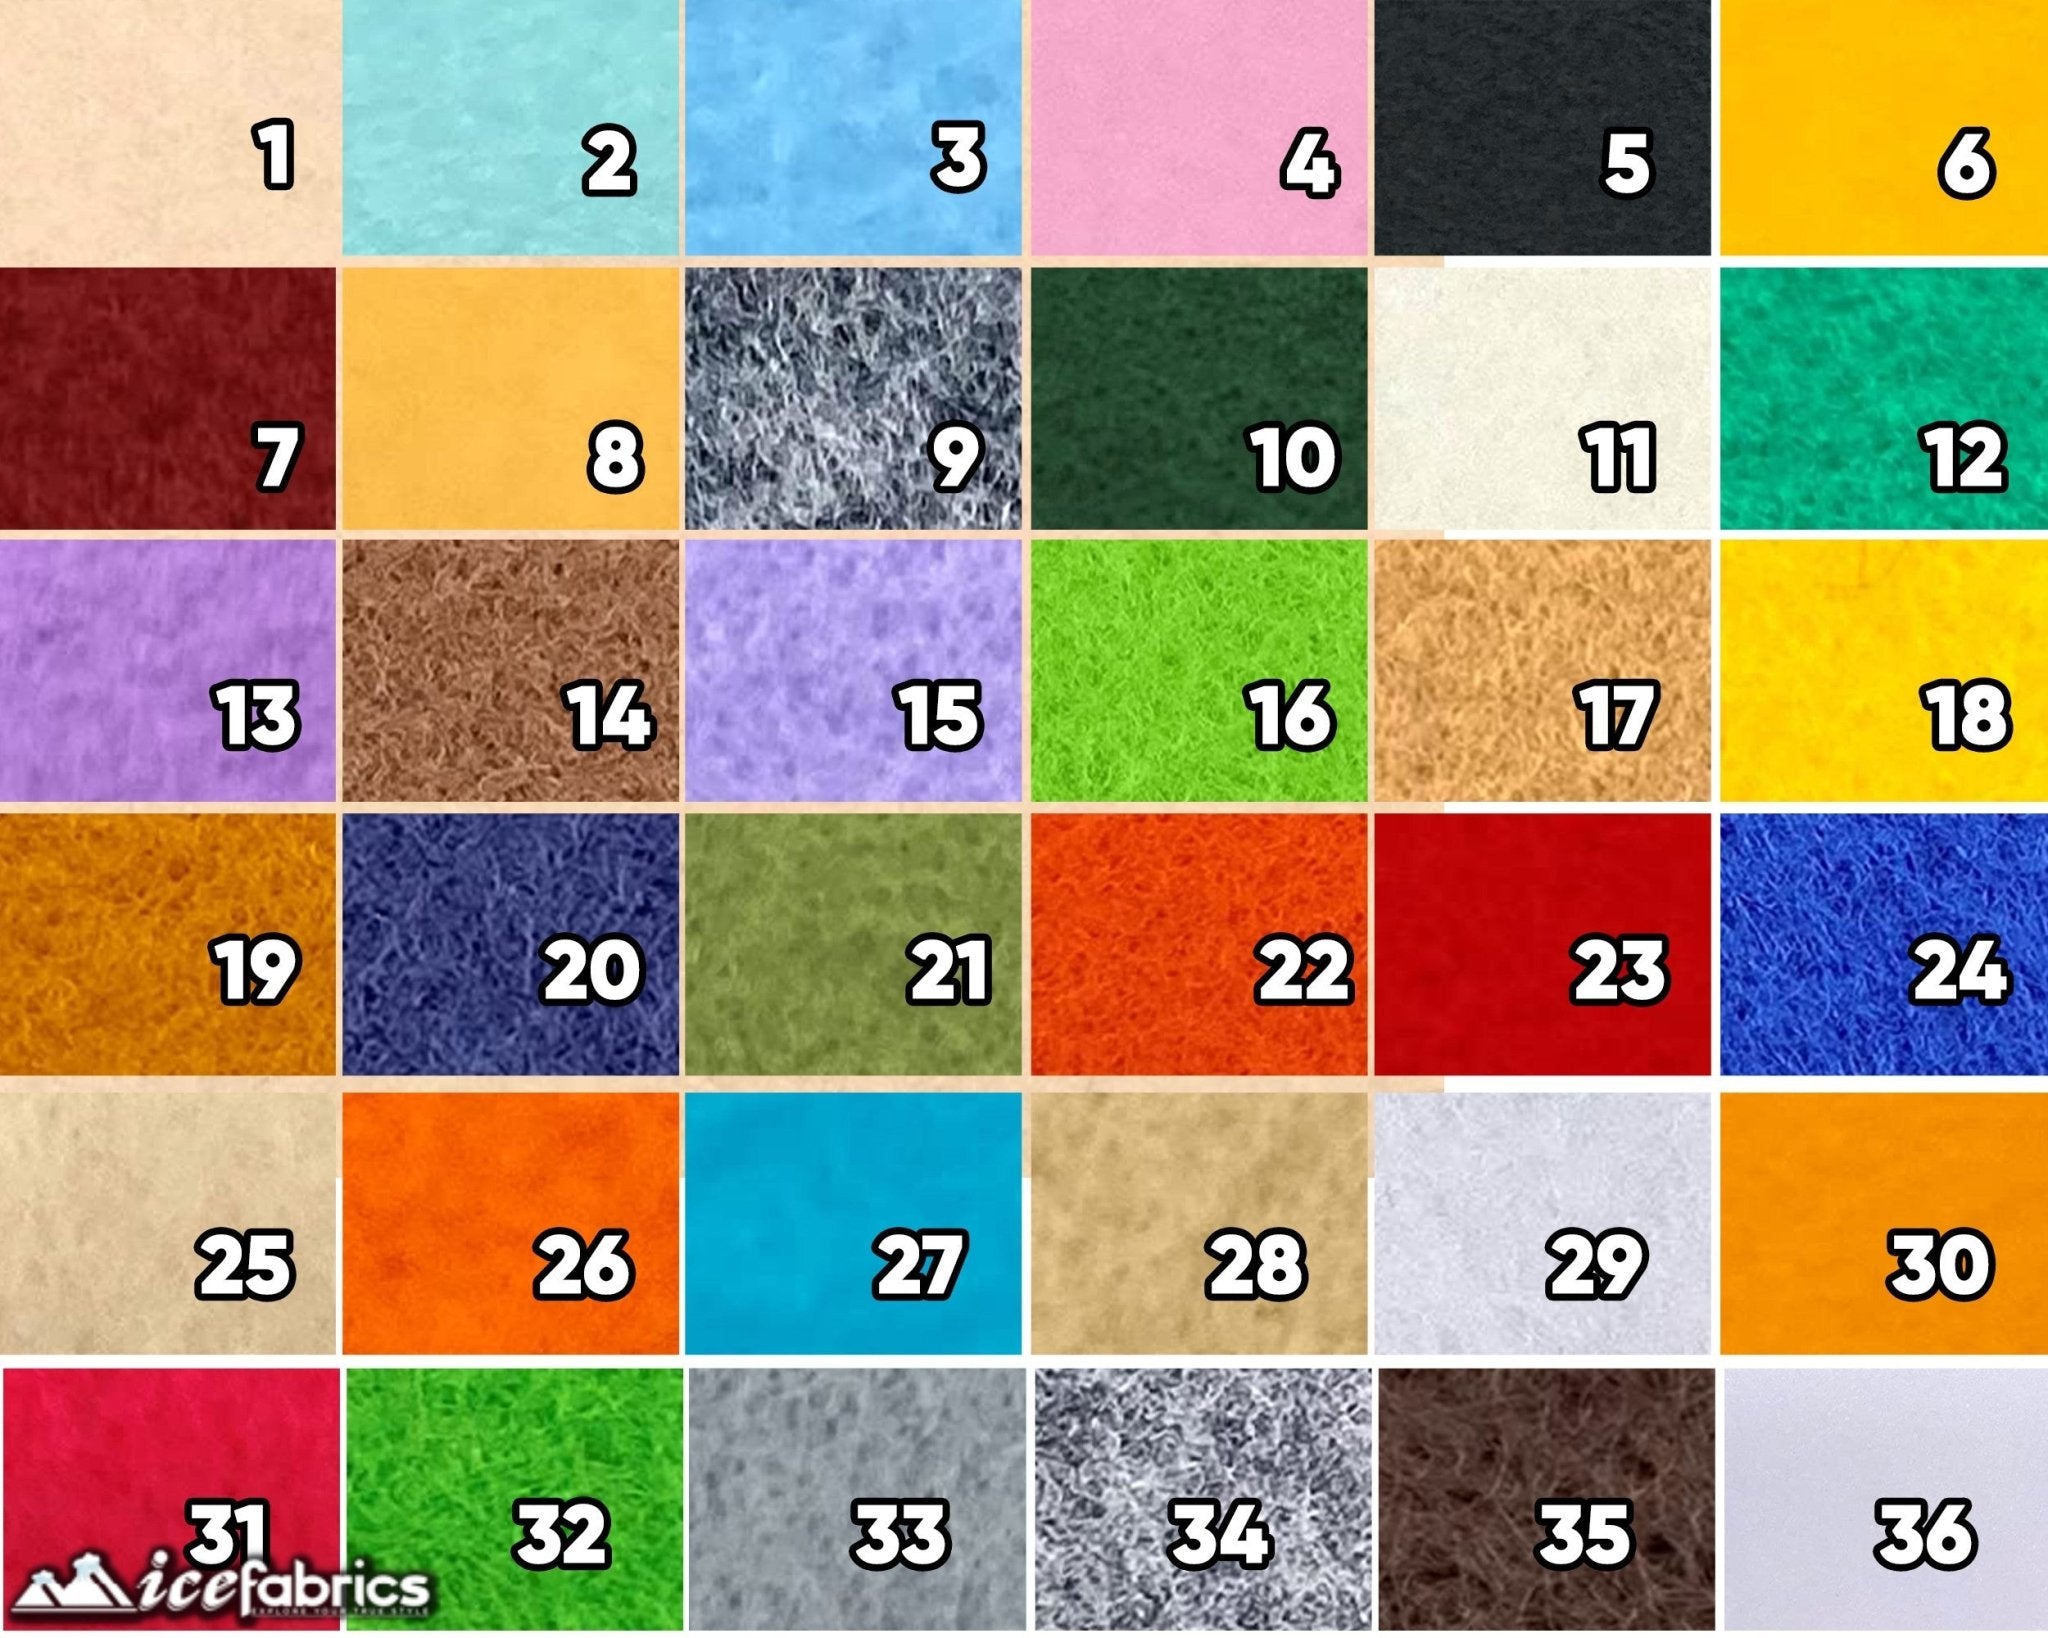 Charcoal Acrylic Felt Fabric / 1.6mm Thick _ 72” WideICE FABRICSICE FABRICSBy The YardCharcoal Acrylic Felt Fabric / 1.6mm Thick _ 72” Wide ICE FABRICS